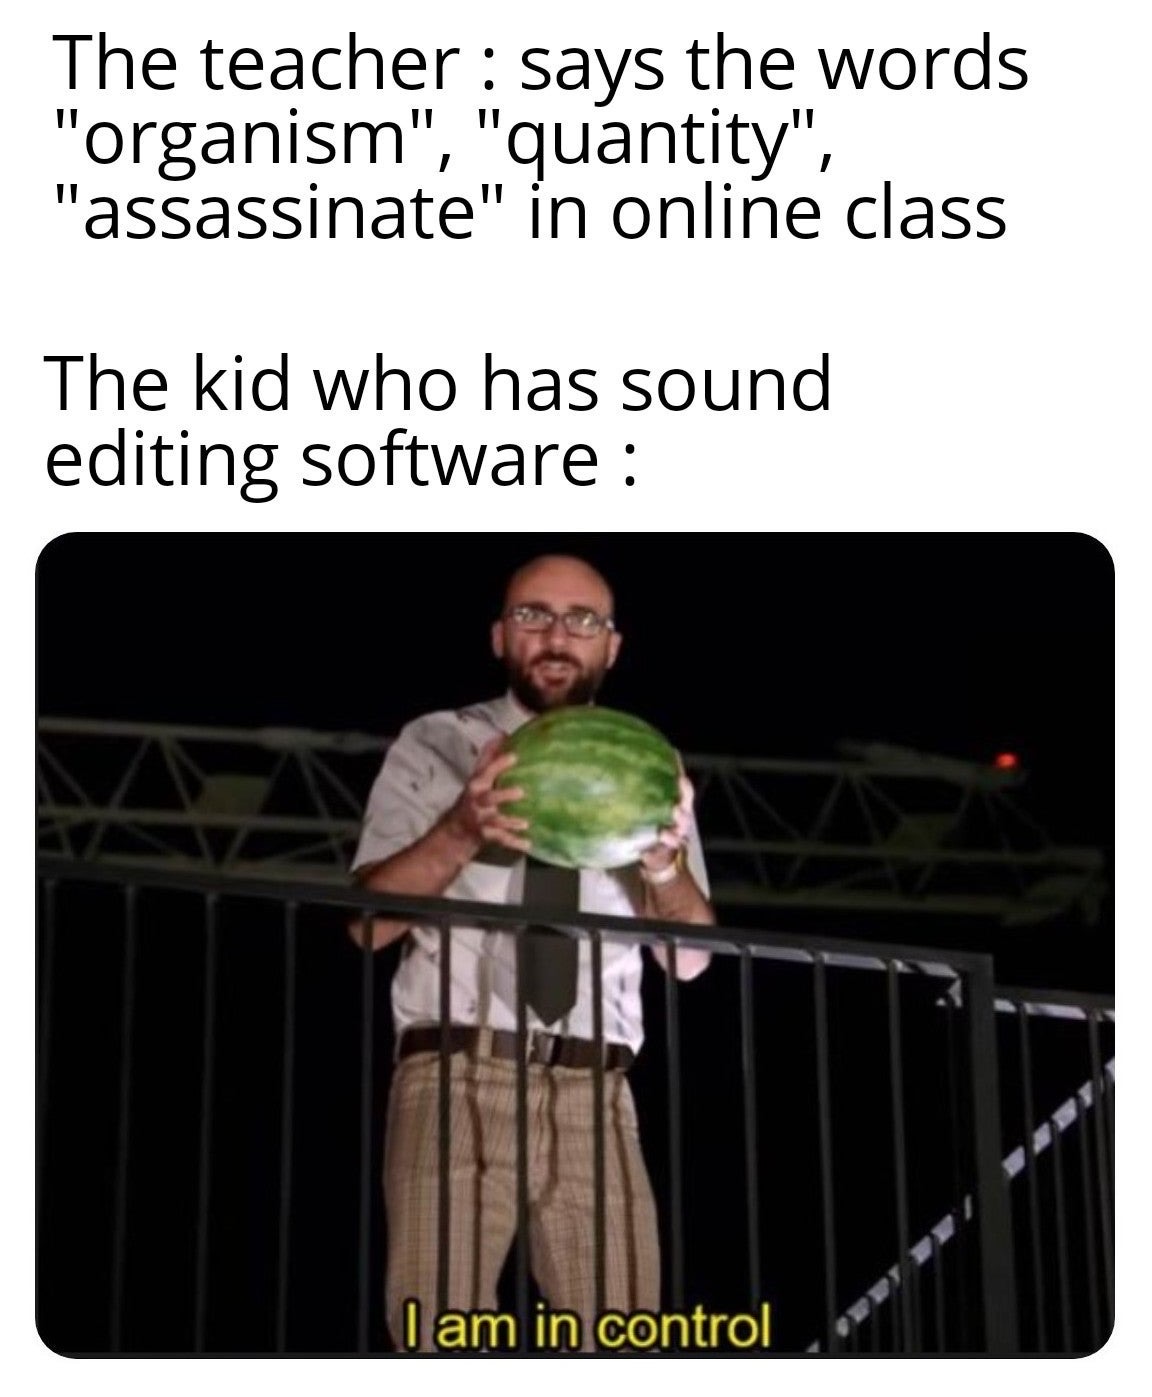 immune system memes - The teacher says the words "organism", "quantity", "assassinate" in online class The kid who has sound editing software I am in control